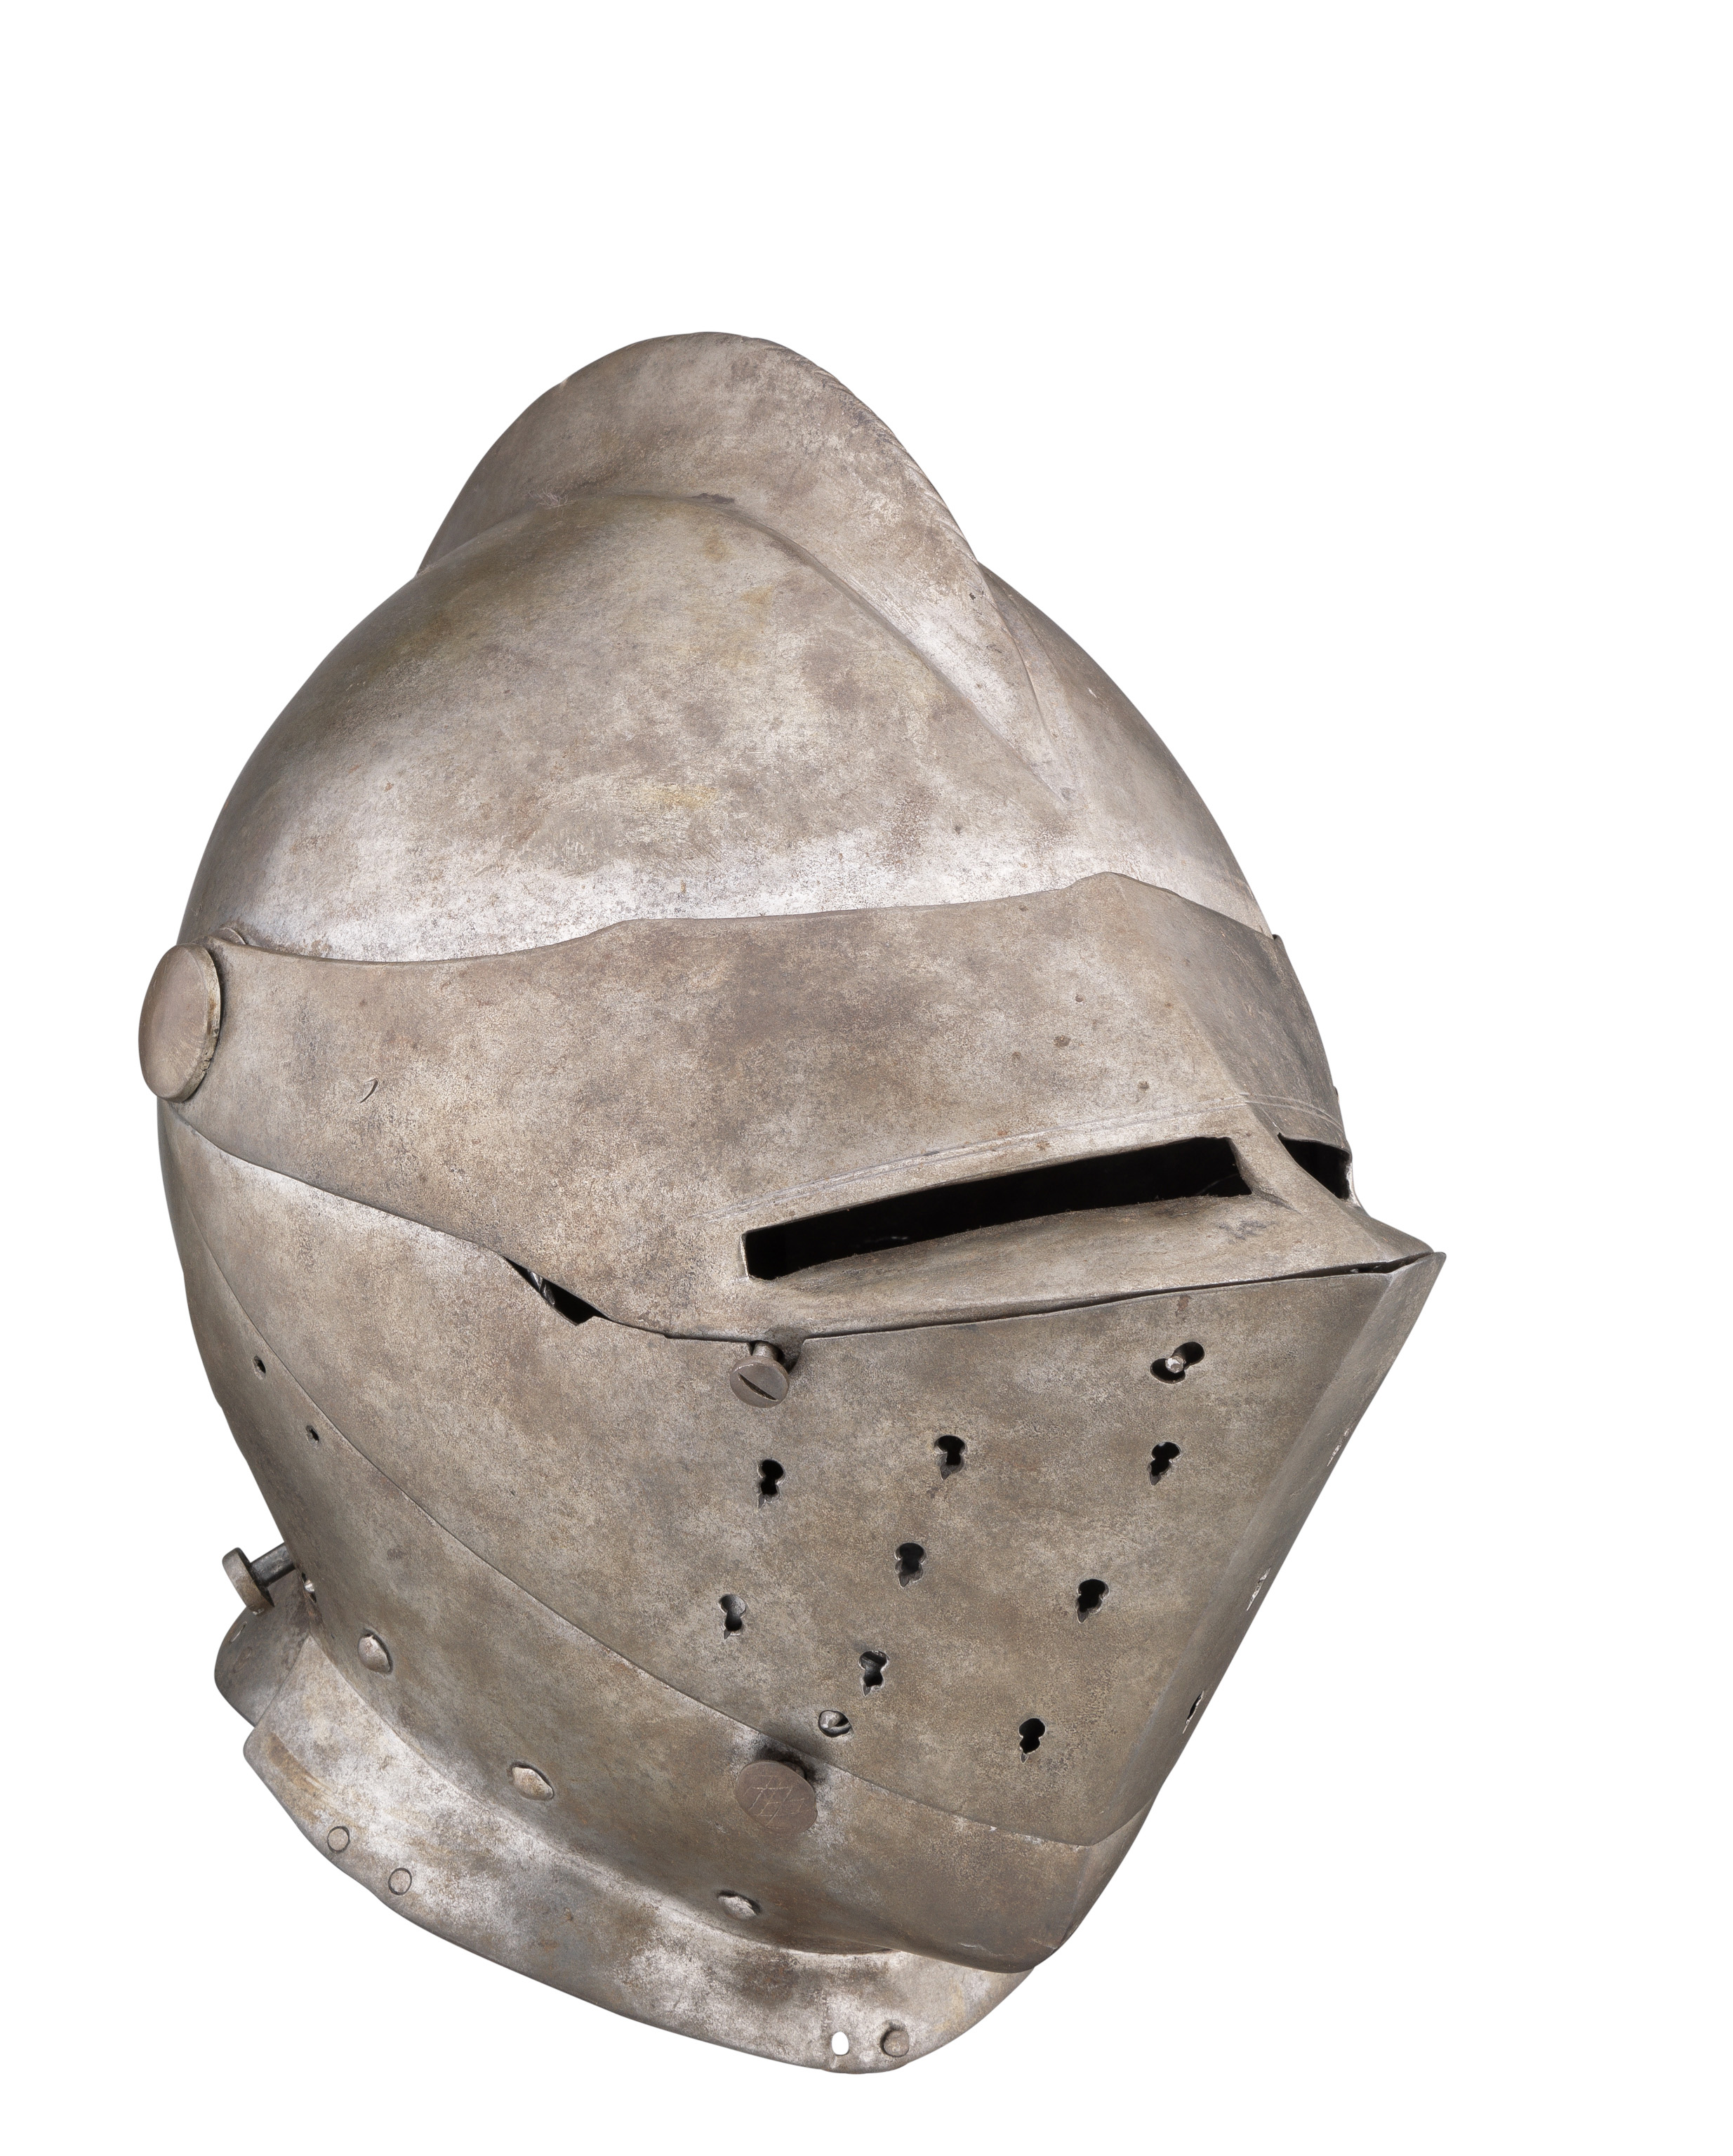 A COMPOSITE GERMAN CLOSE HELMET FOR HEAVY FIELD USE, LATE 16TH CENTURY with rounded one-piece